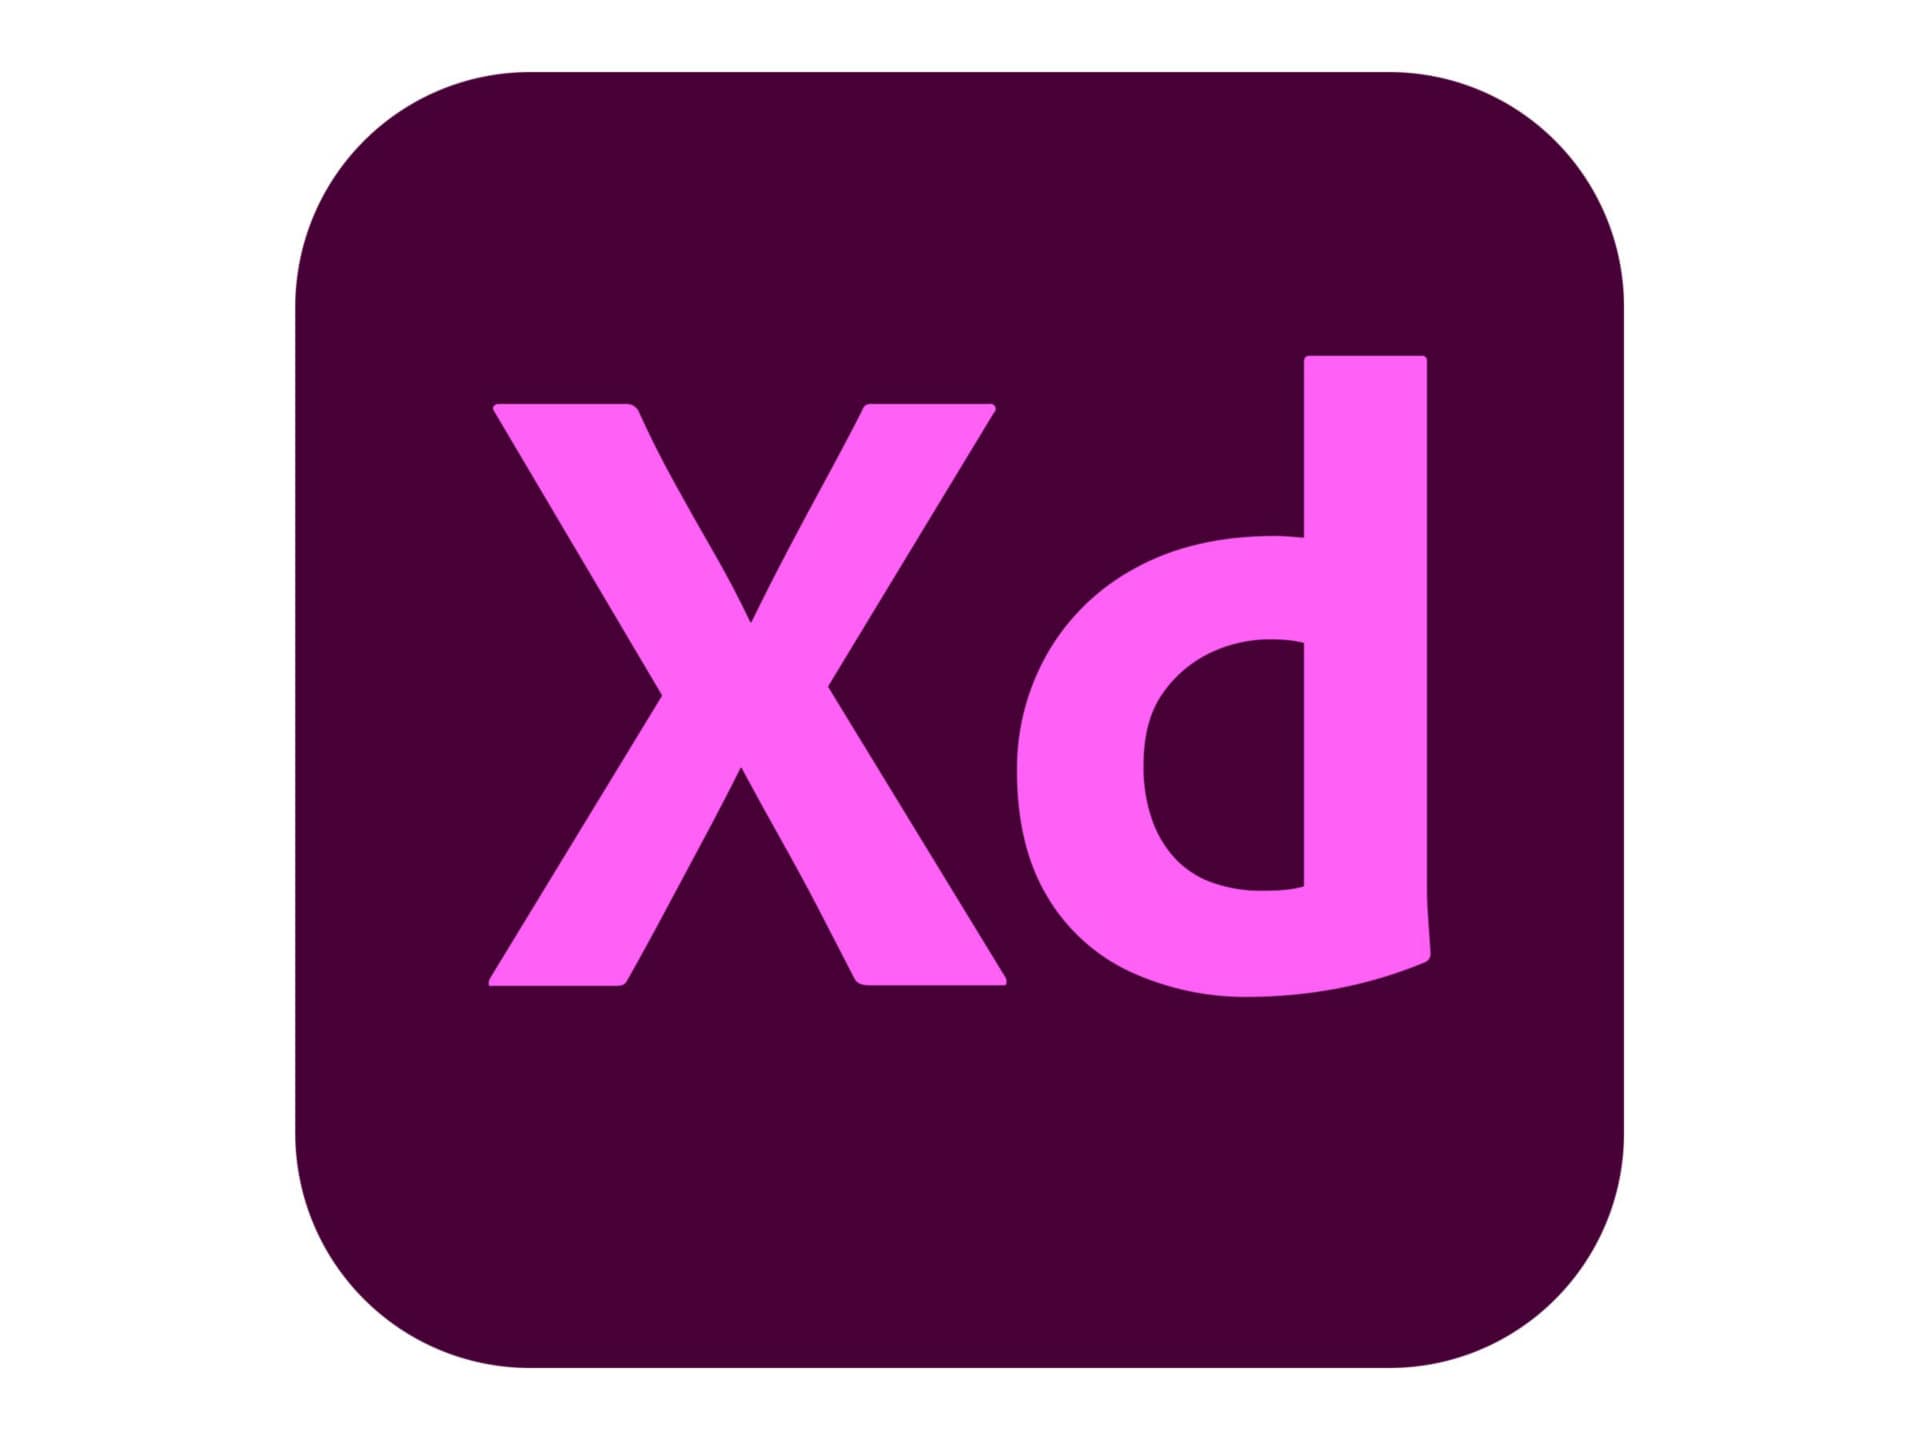 Adobe XD CC for Teams - Subscription New - 1 user